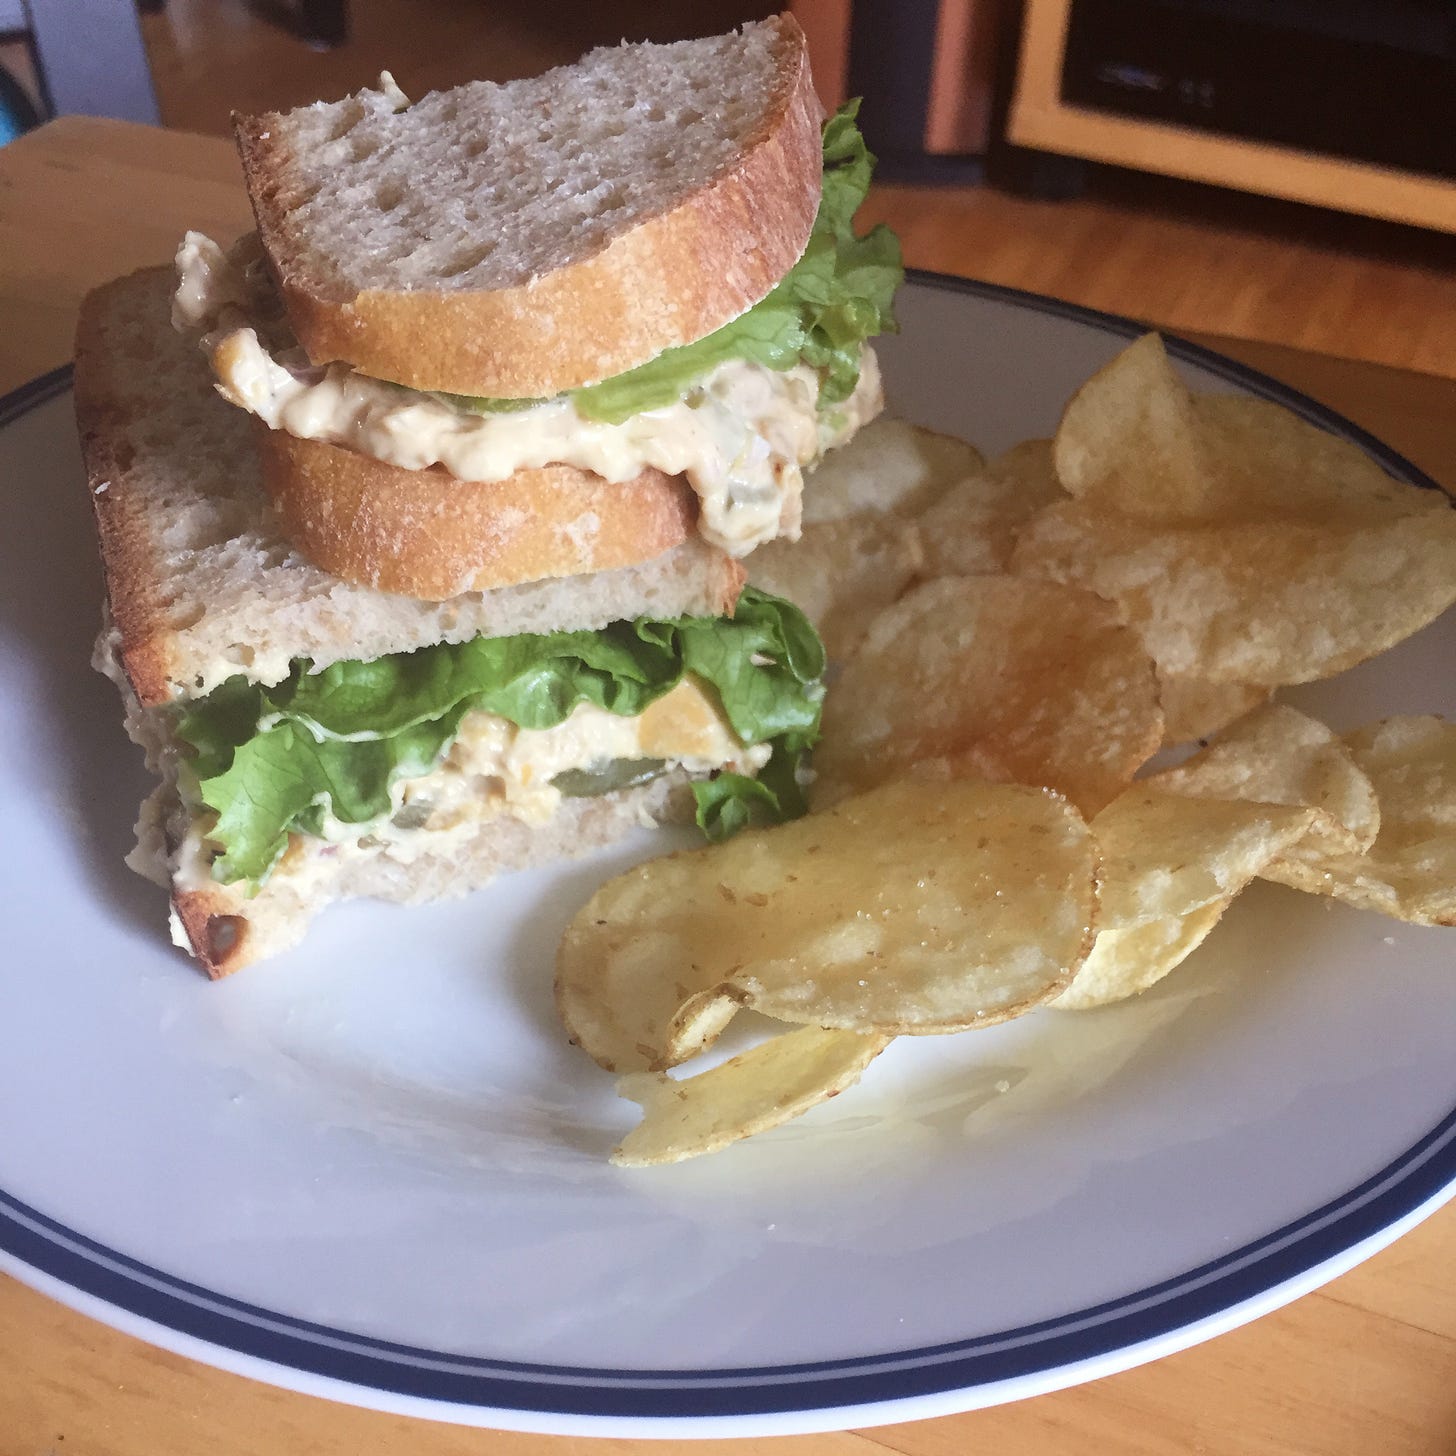 A plate with two sandwich halves stacked on top of each other, with green leaf lettuce and the chickpea filling falling out in places. A small pile of potato chips is next to them.